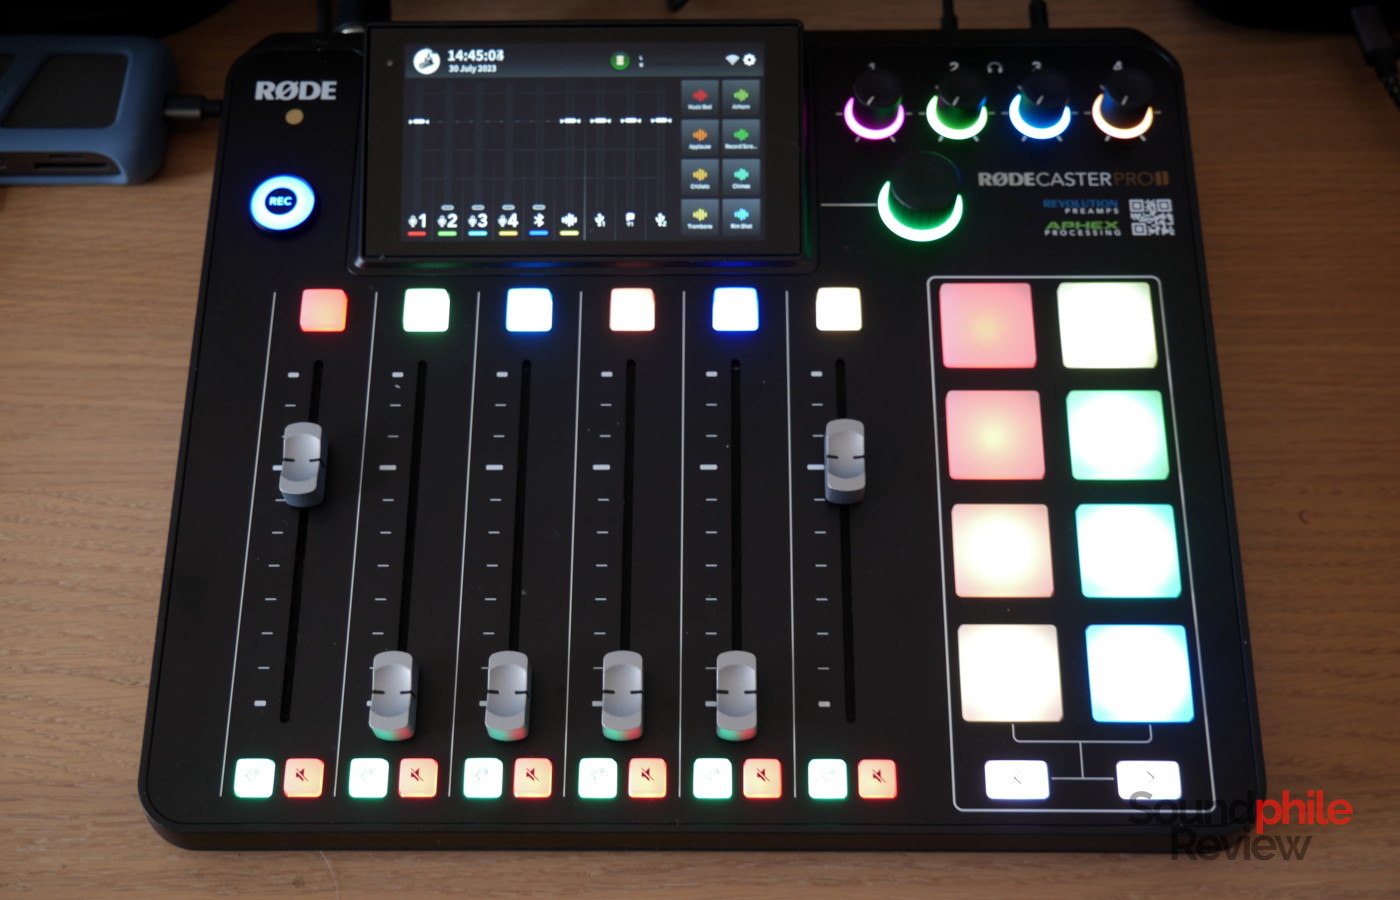 The RØDECaster Pro II is quite big and has a whole lot of buttons!